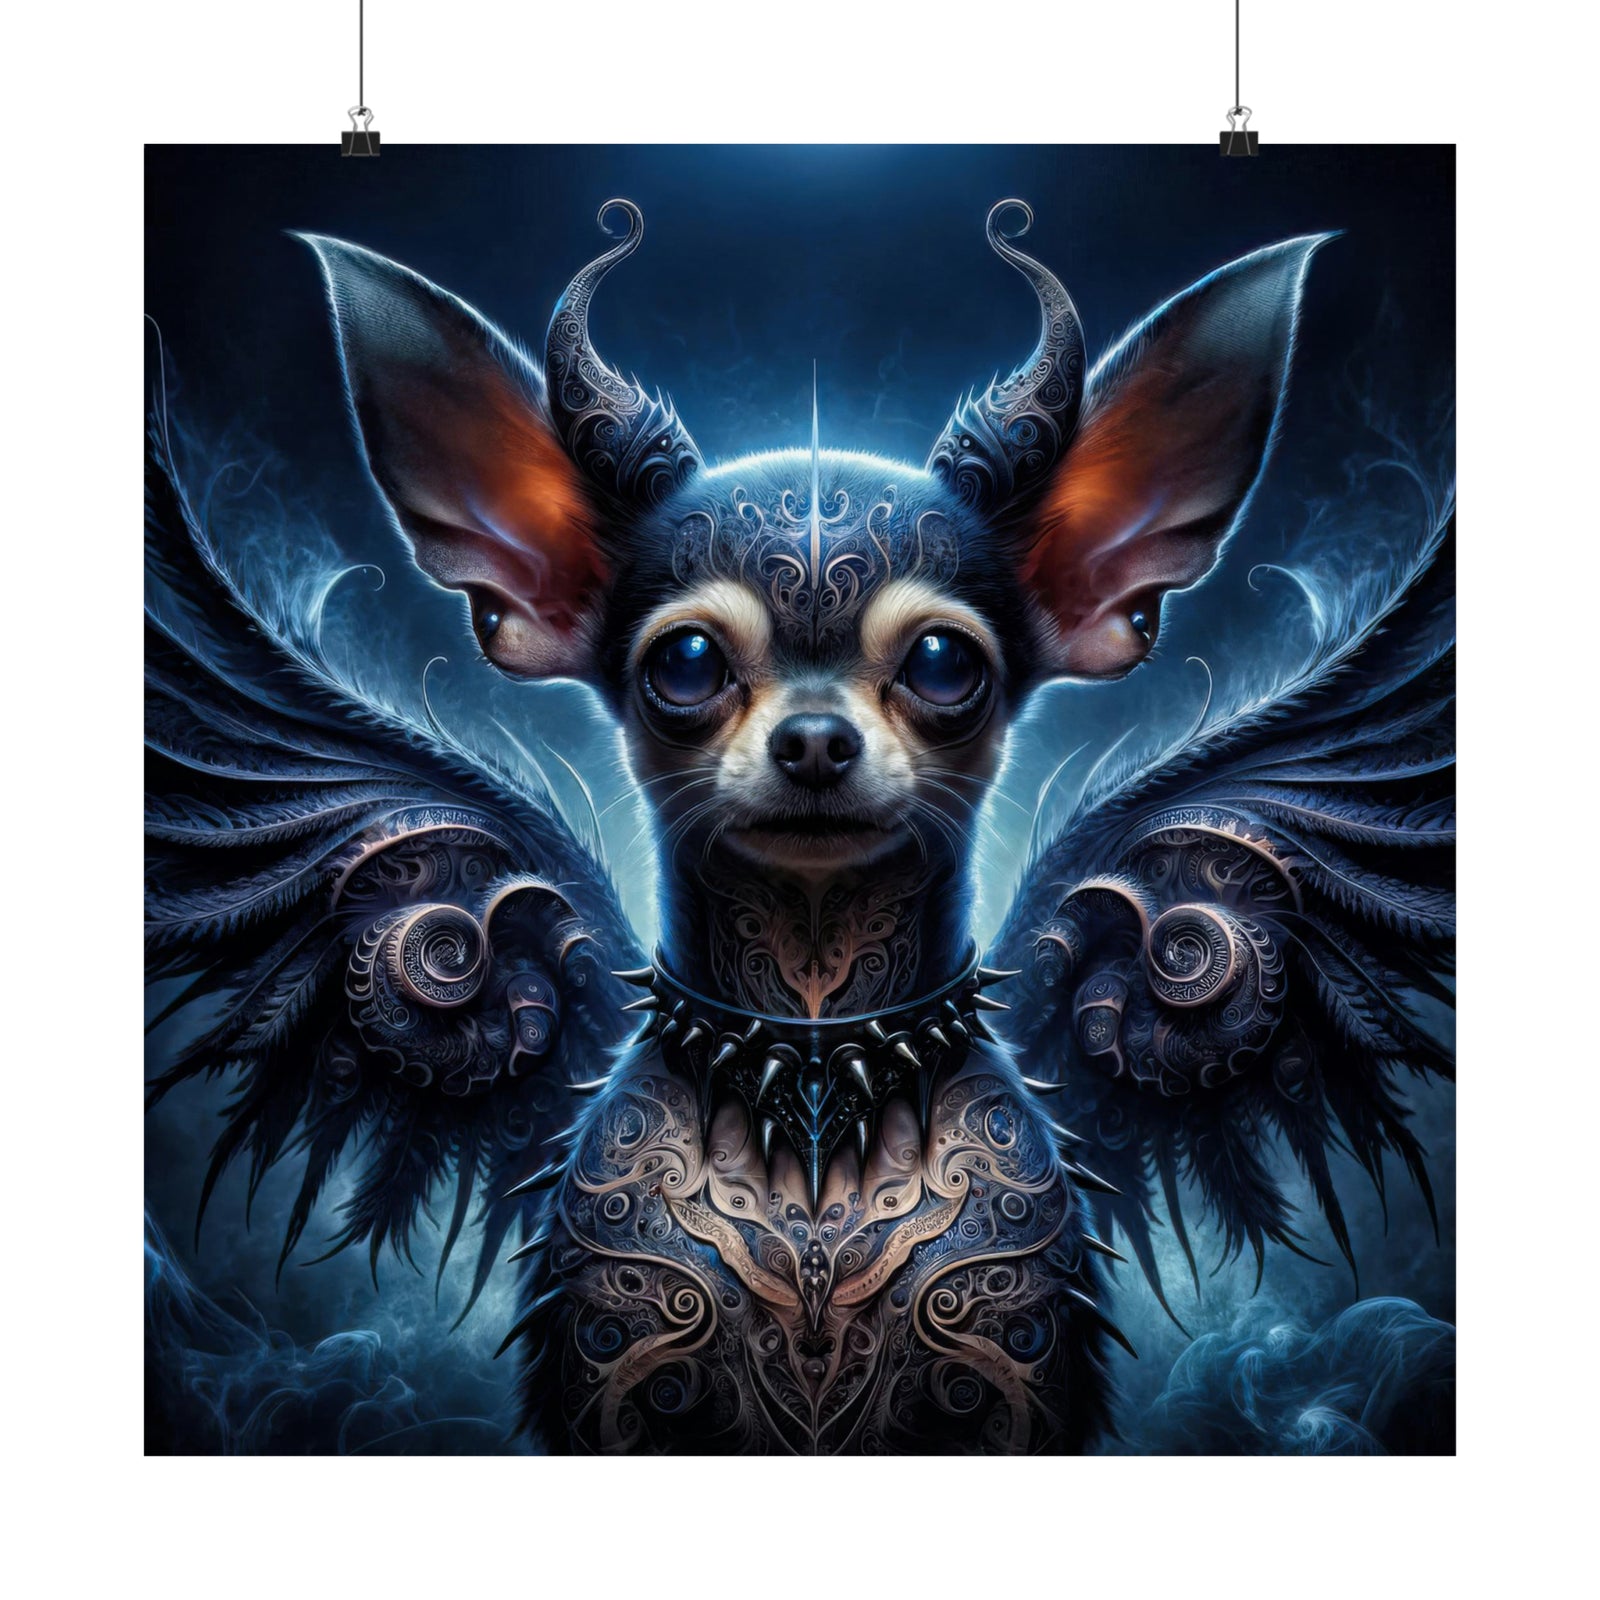 The Enchanted Chihuahua Poster